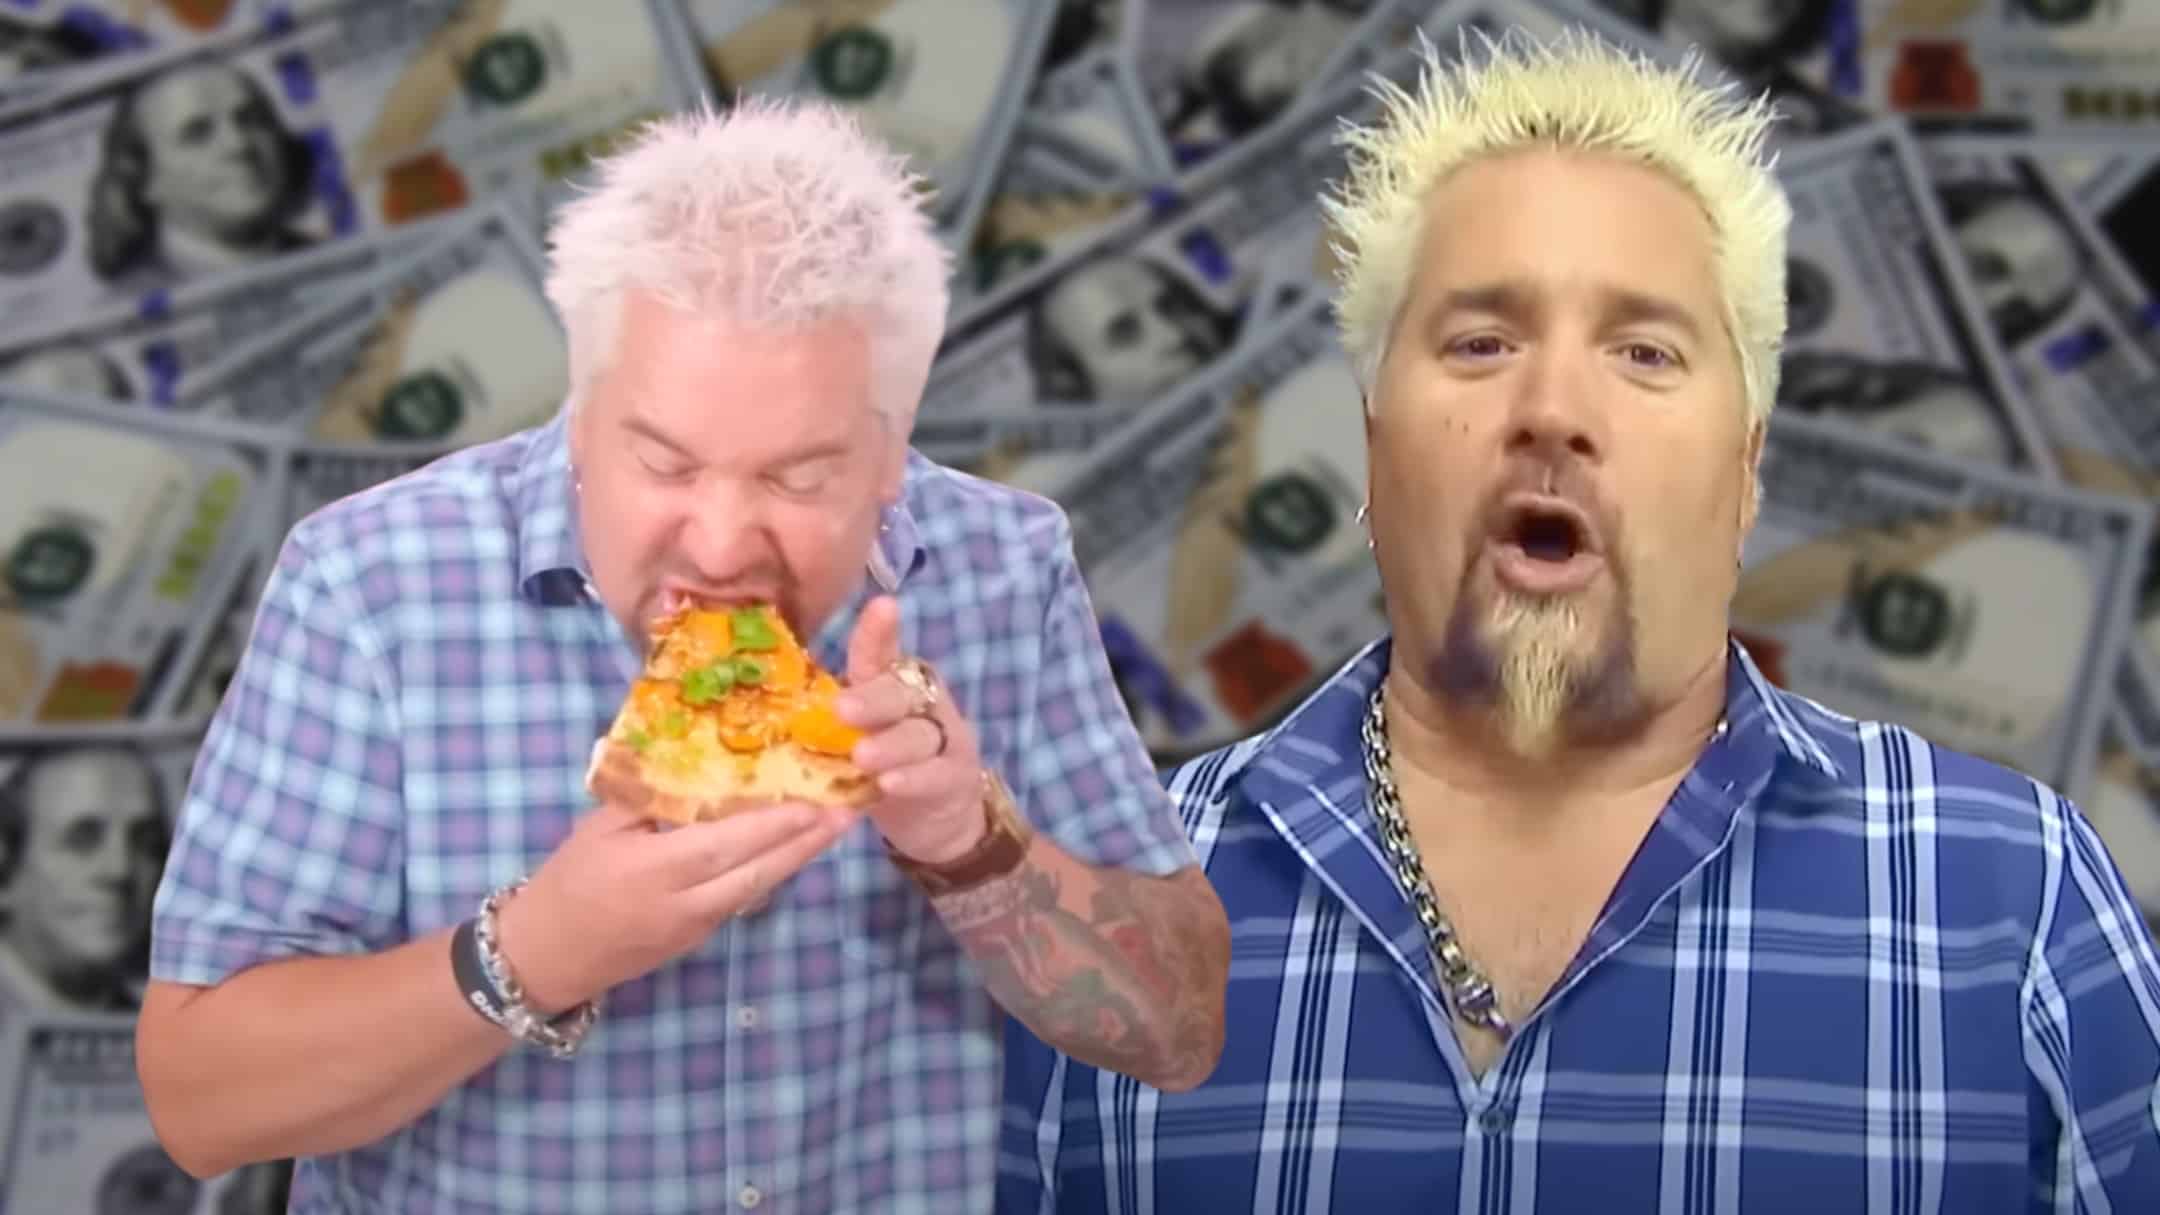 Do restaurants pay to be on Diners Drive-Ins and Dives